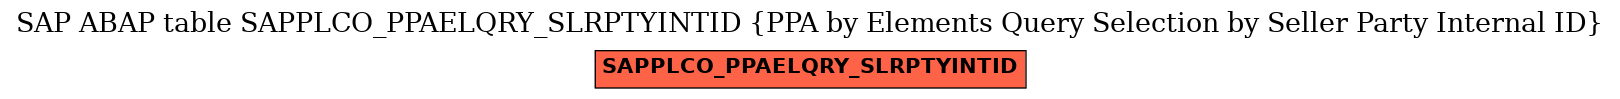 E-R Diagram for table SAPPLCO_PPAELQRY_SLRPTYINTID (PPA by Elements Query Selection by Seller Party Internal ID)